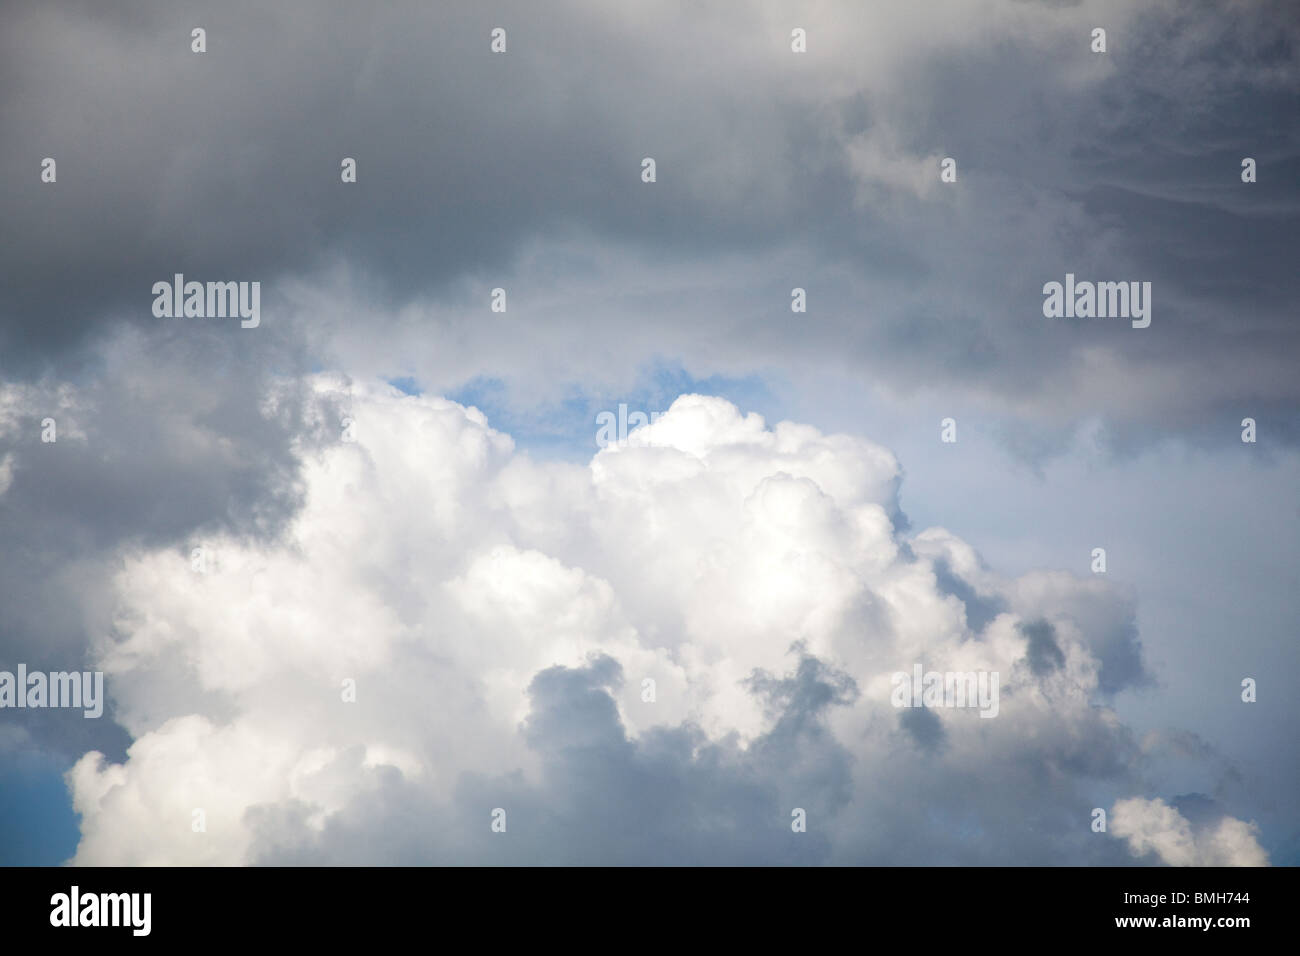 Rain filled clouds against a blue sky background, Hampshire, England. Stock Photo